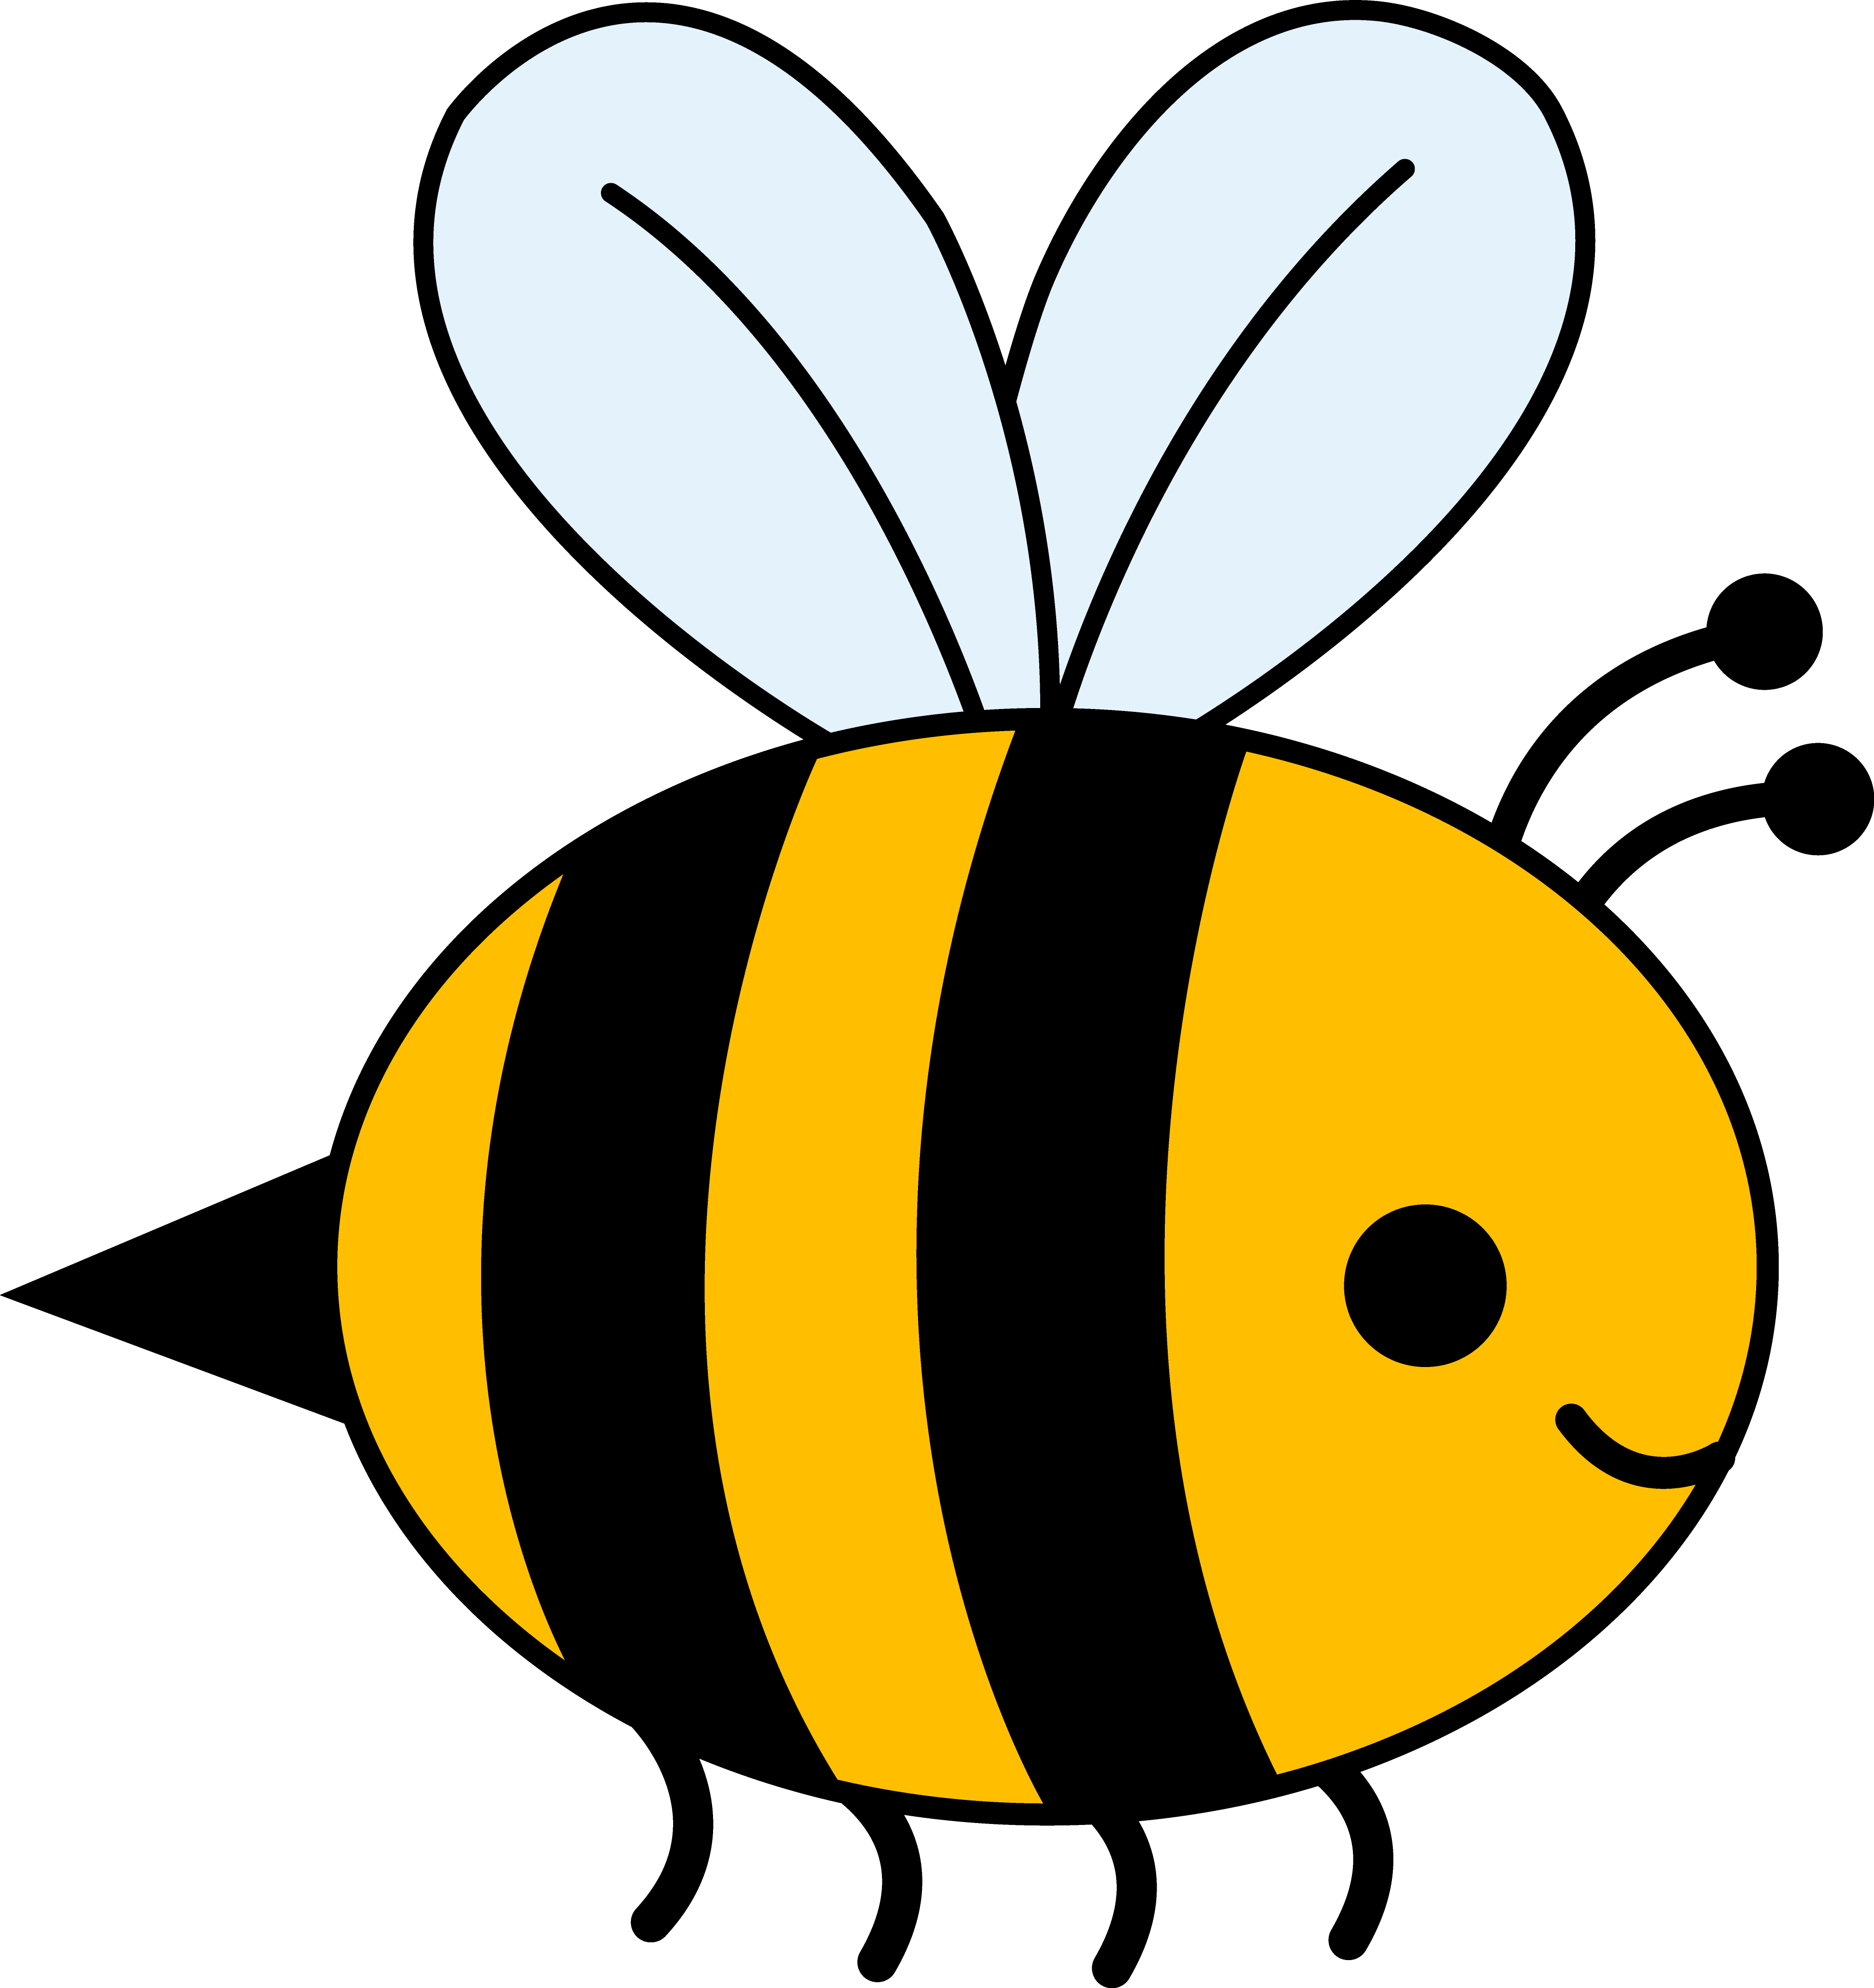 Animated Bee Clipart